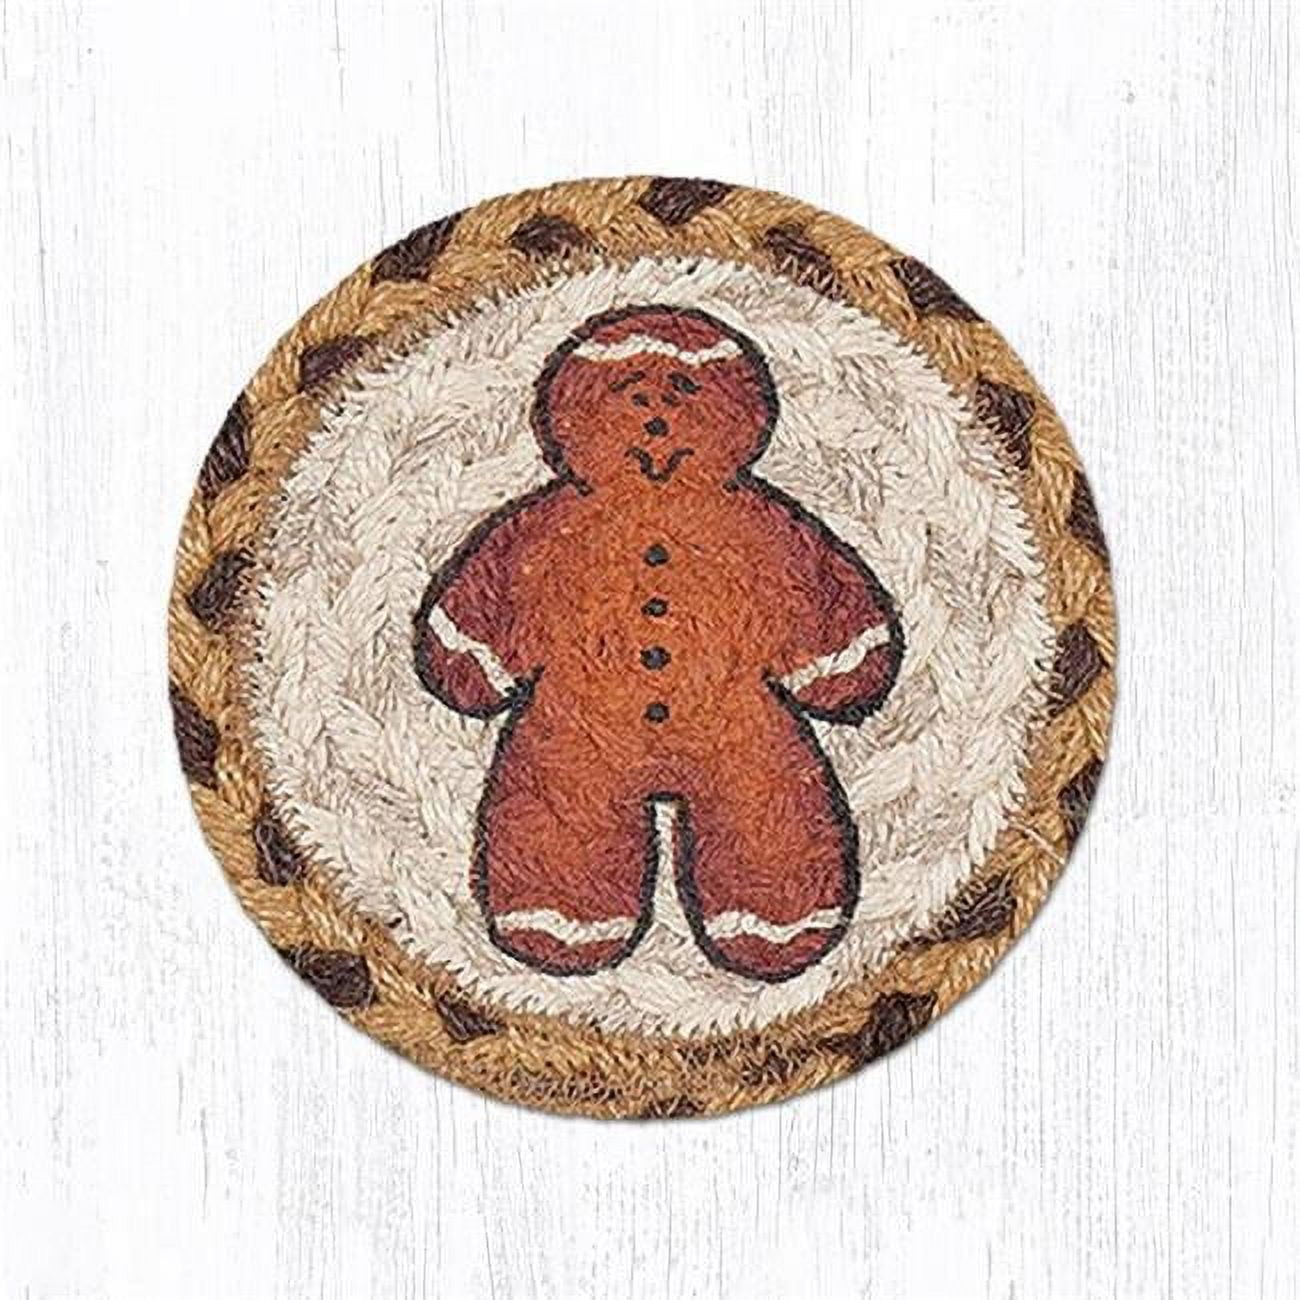 5 X 5 In. Gingerbread Man Printed Round Coaster